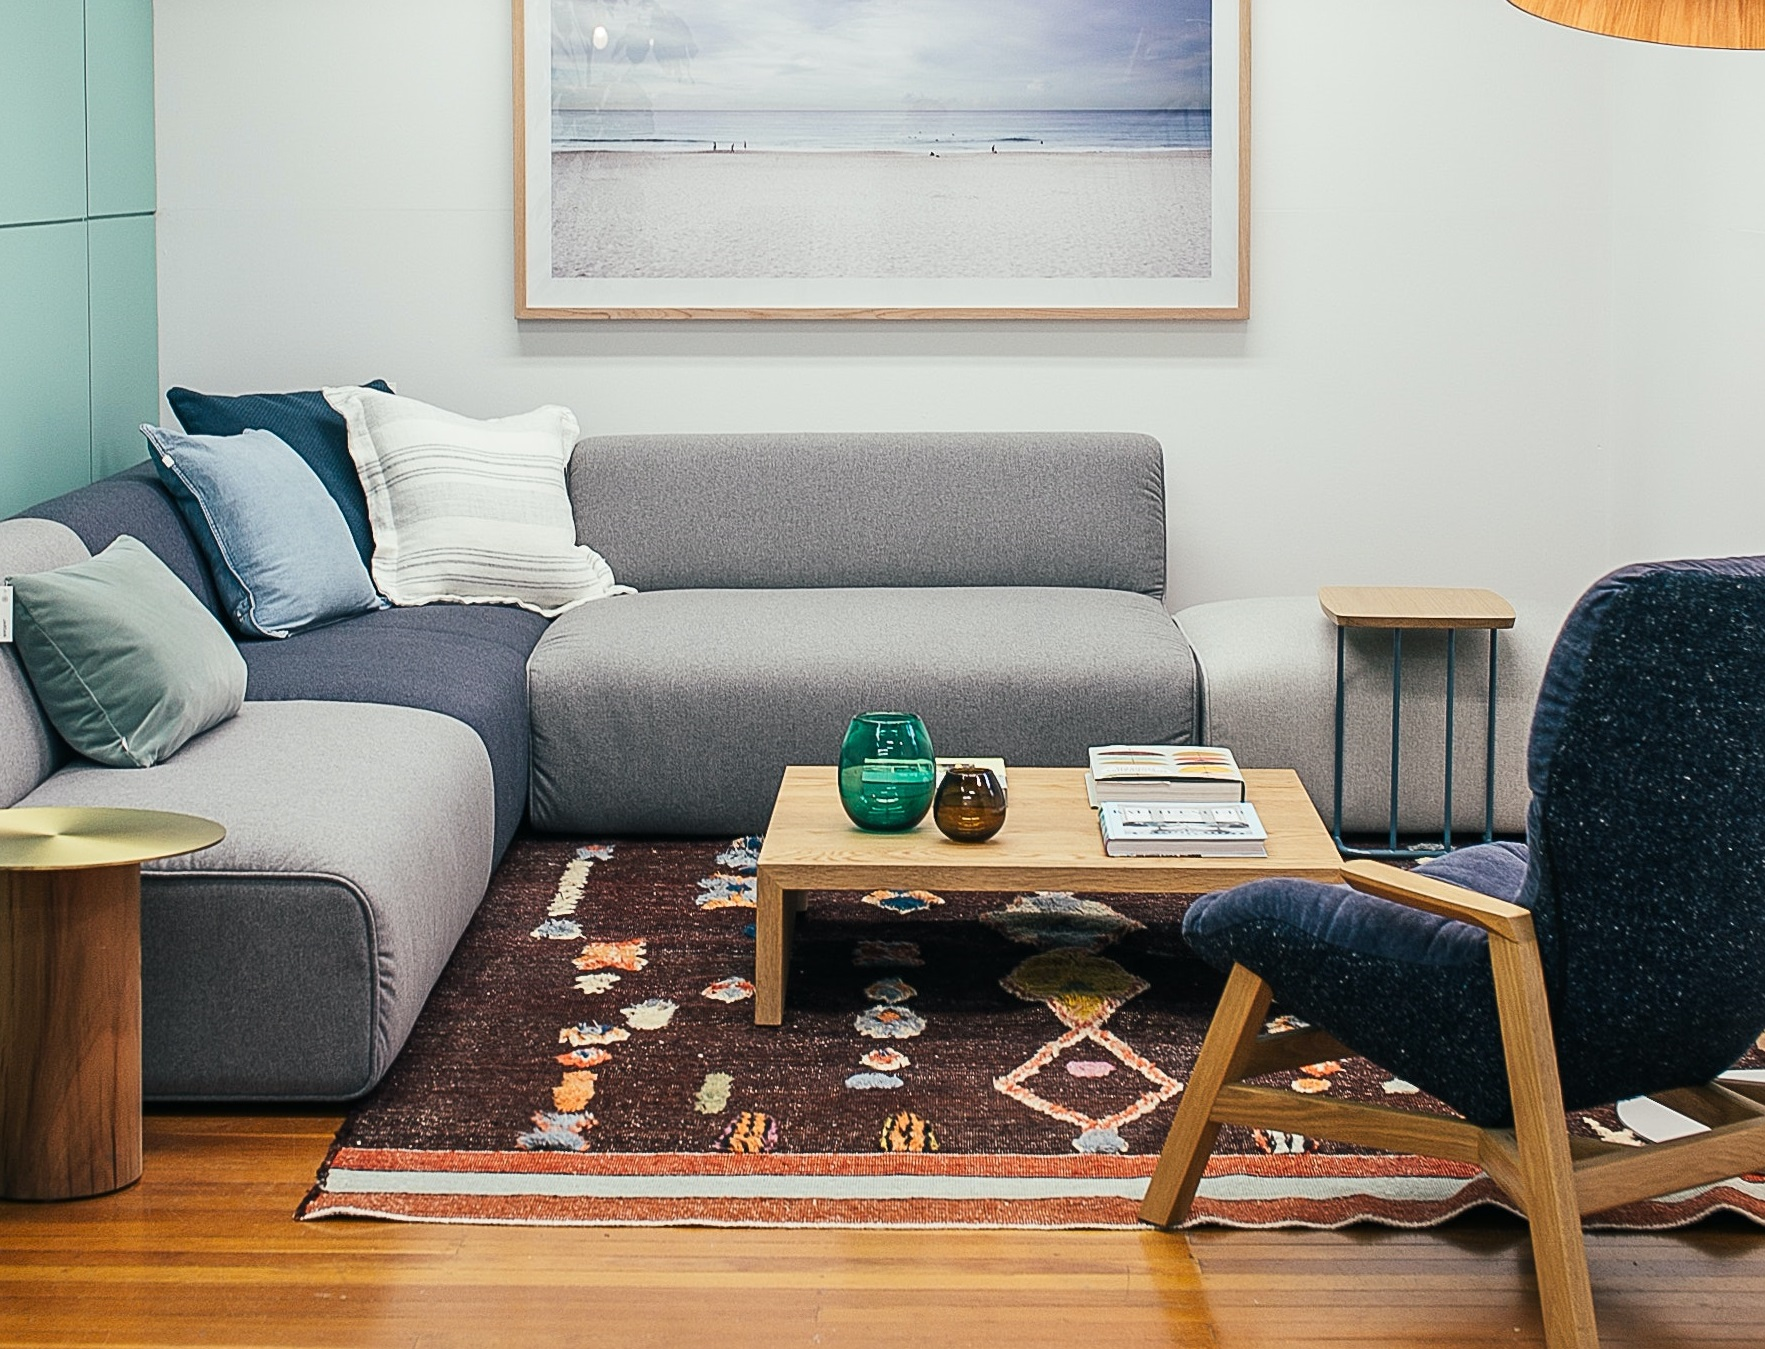 Image credit: https://www.pexels.com/photo/cozy-living-room-interior-with-comfy-couch-and-armchair-and-wooden-details-4846106/